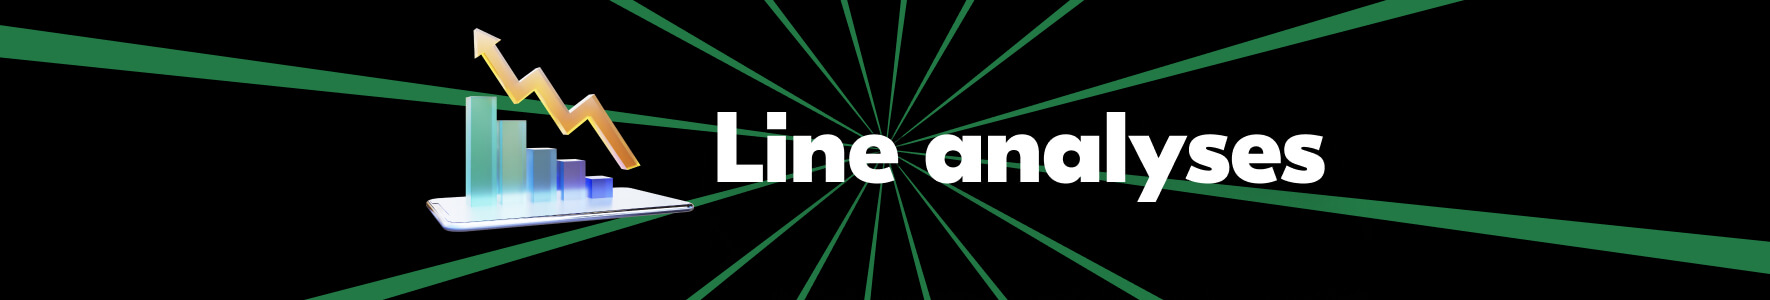 Line analyses - odds, markets, prices